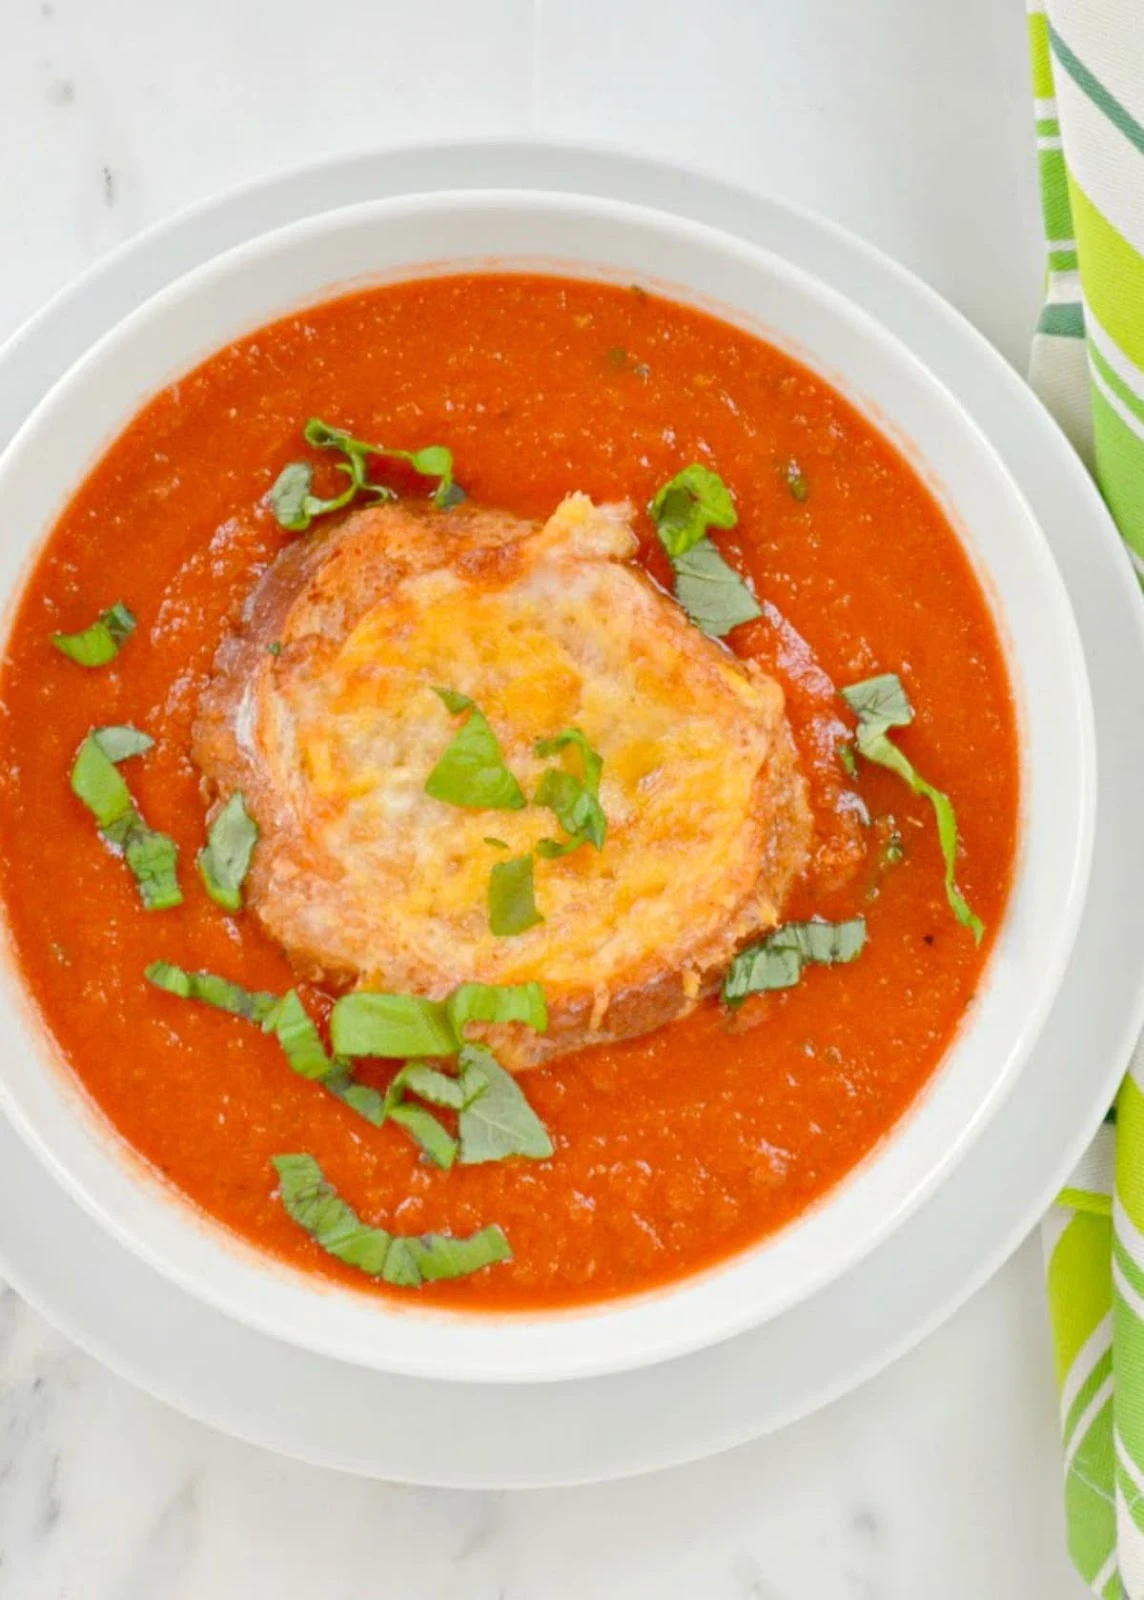 Homemade Tomato Basil Soup recipe with Cheesy bread is a quick easy dinner recipe in under 30 minutes from Serena Bakes Simply From Scratch.